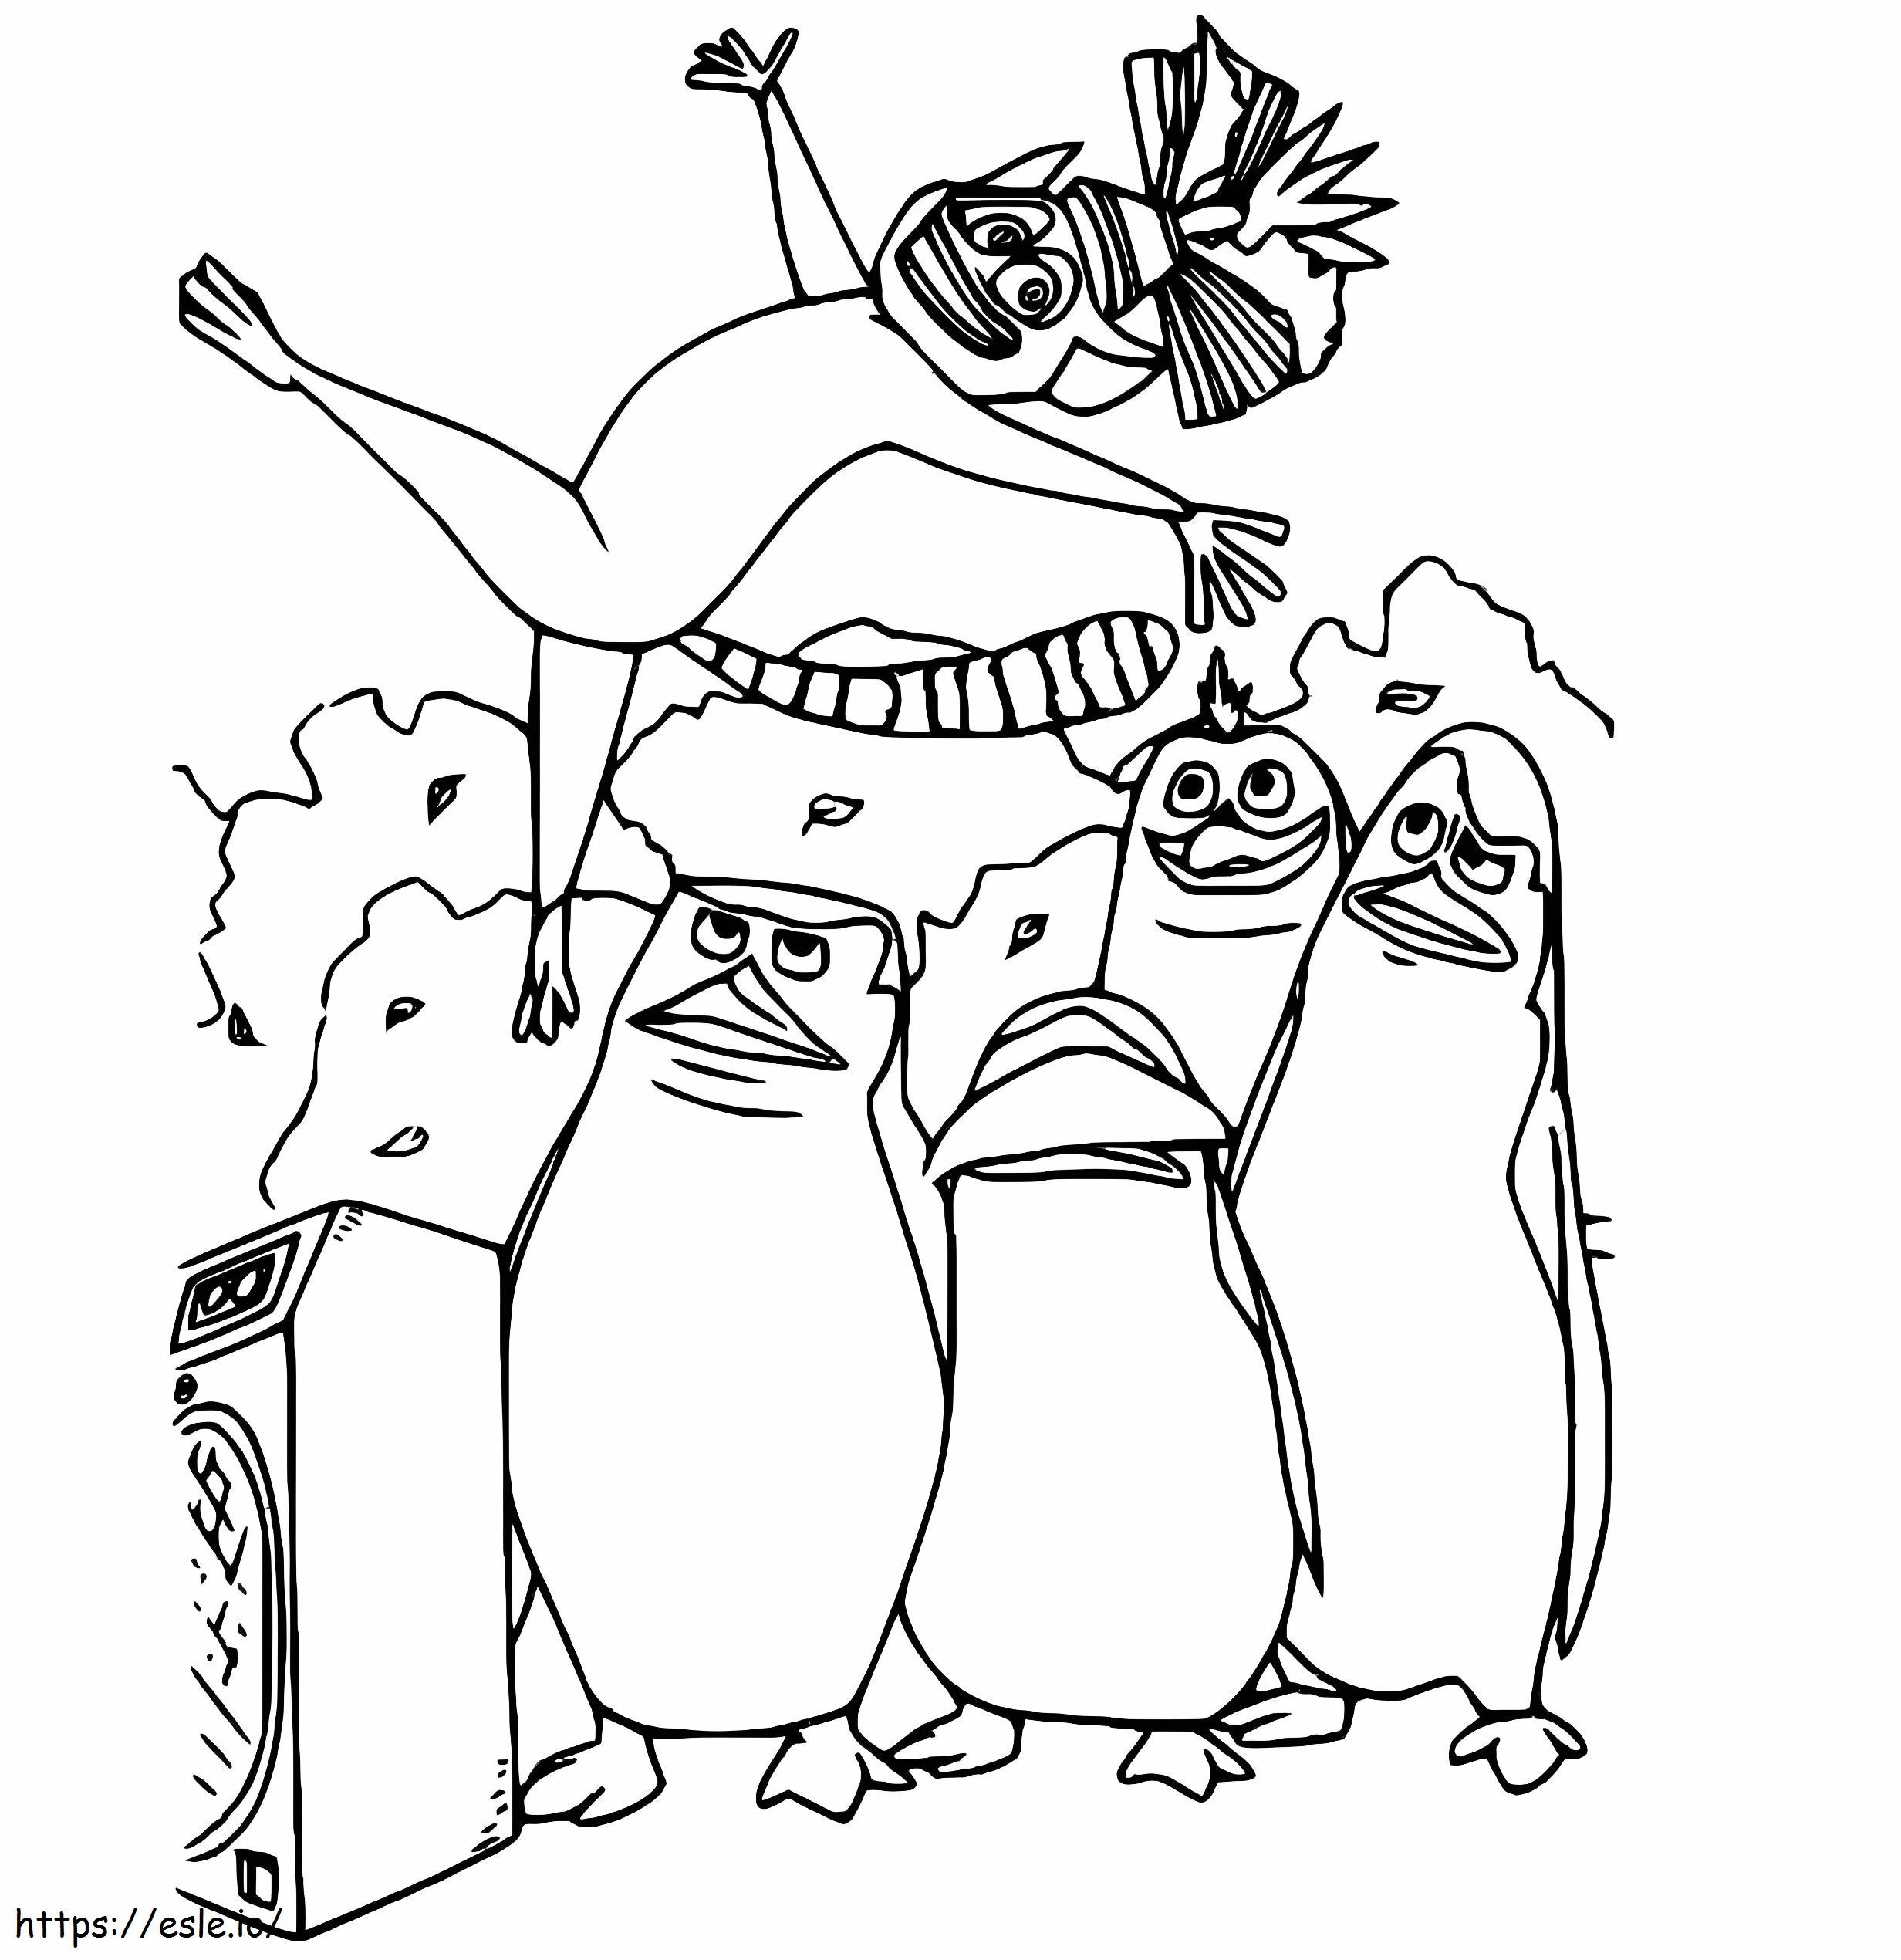 Free Printable Penguins Of Madagascar coloring page